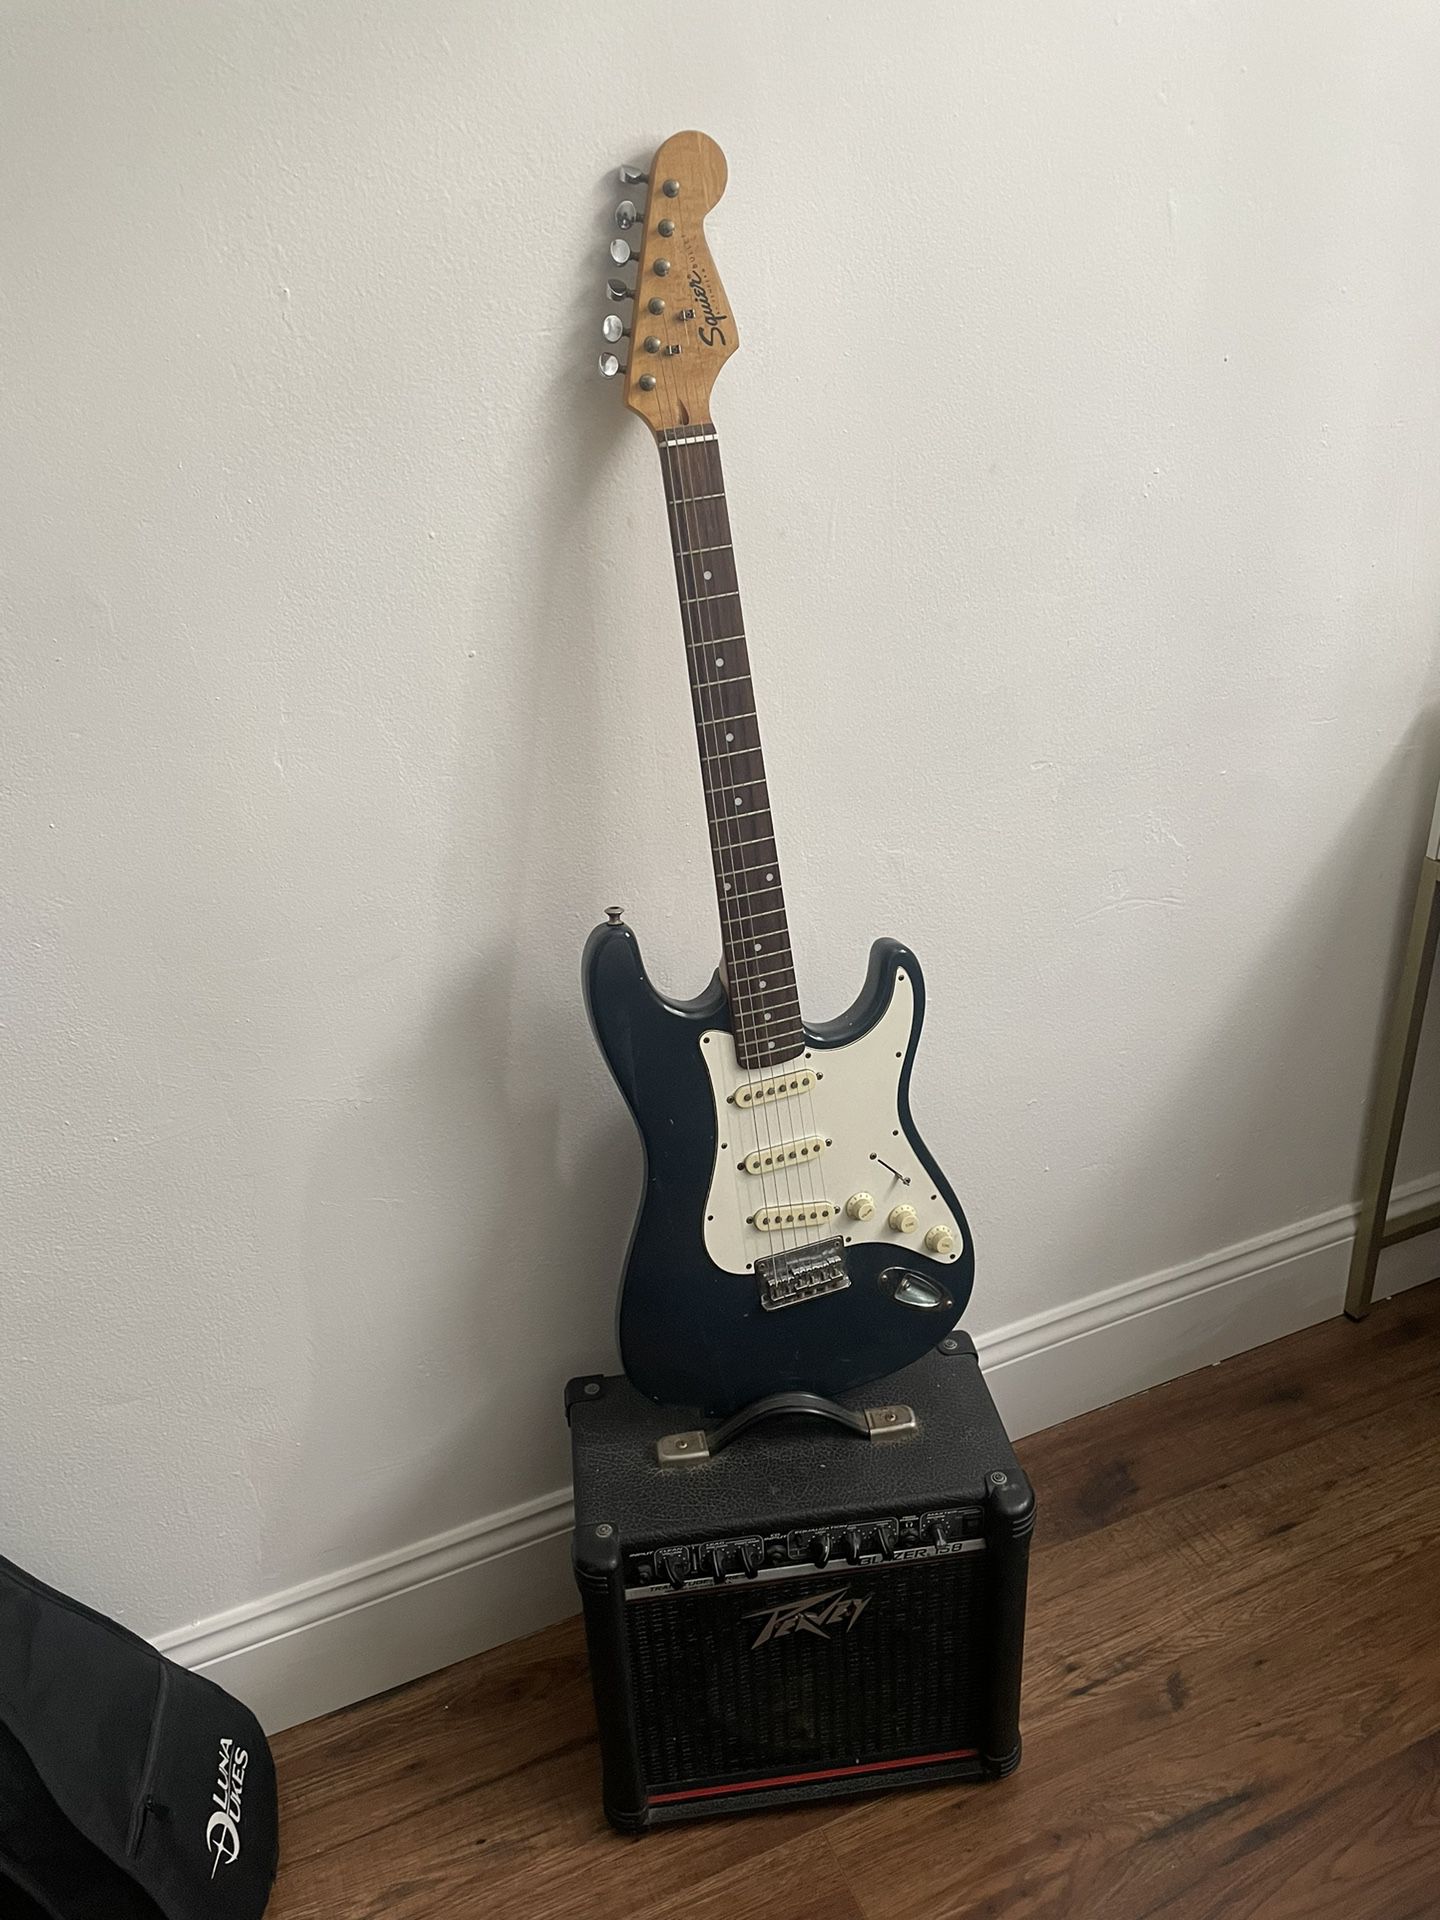 Squier Electric Guitar With Amp